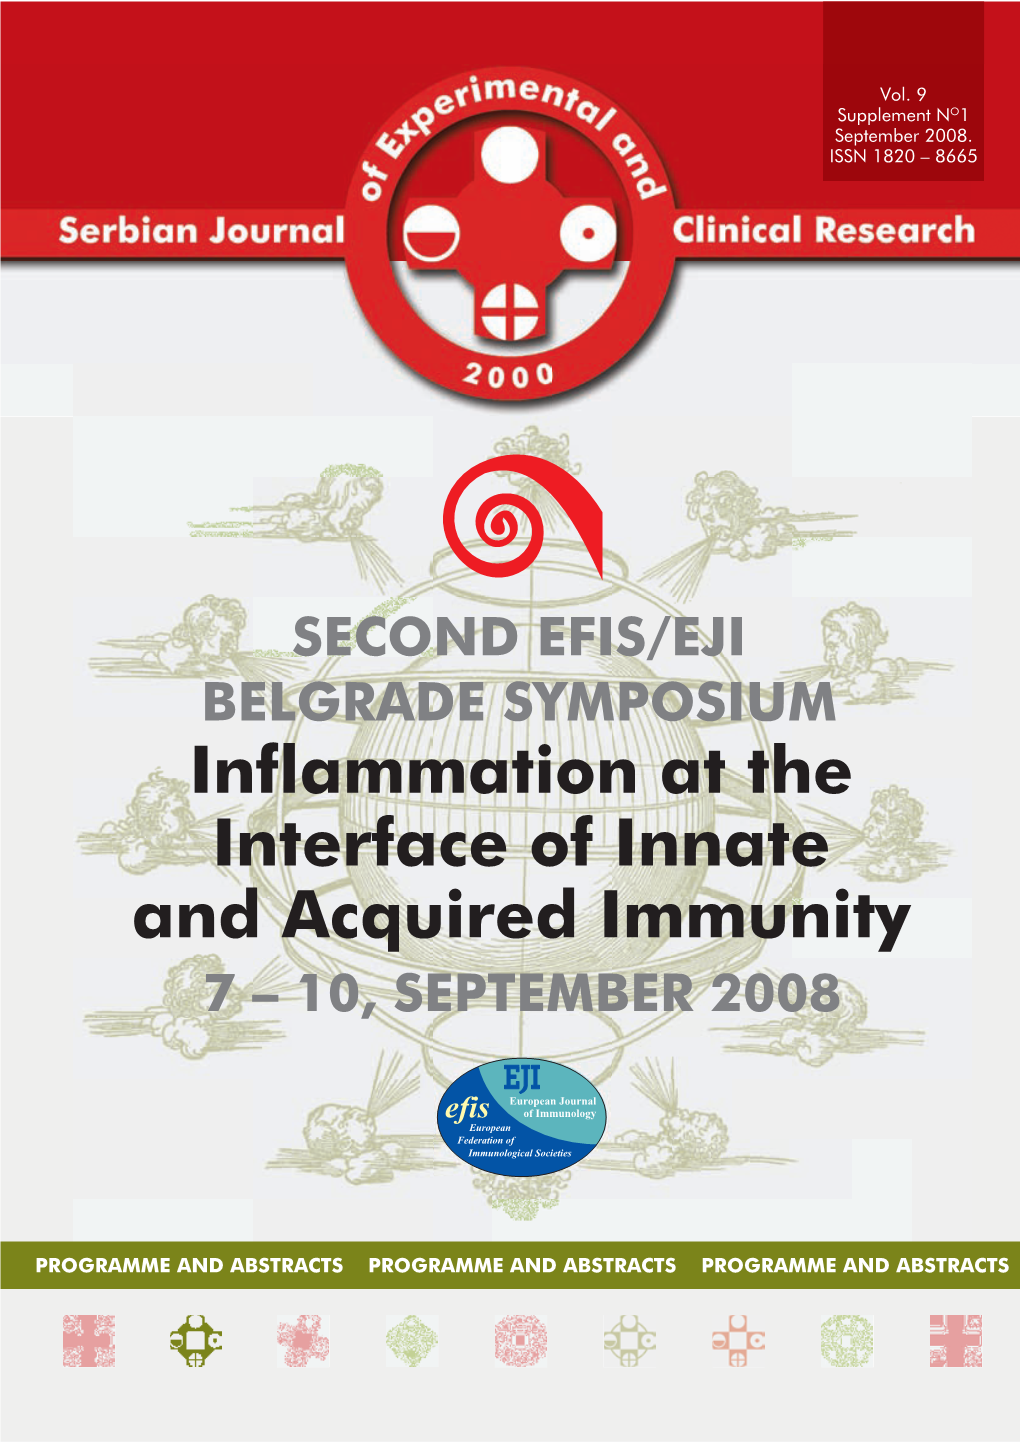 Inflammation at the Interface of Innate and Acquired Immunity